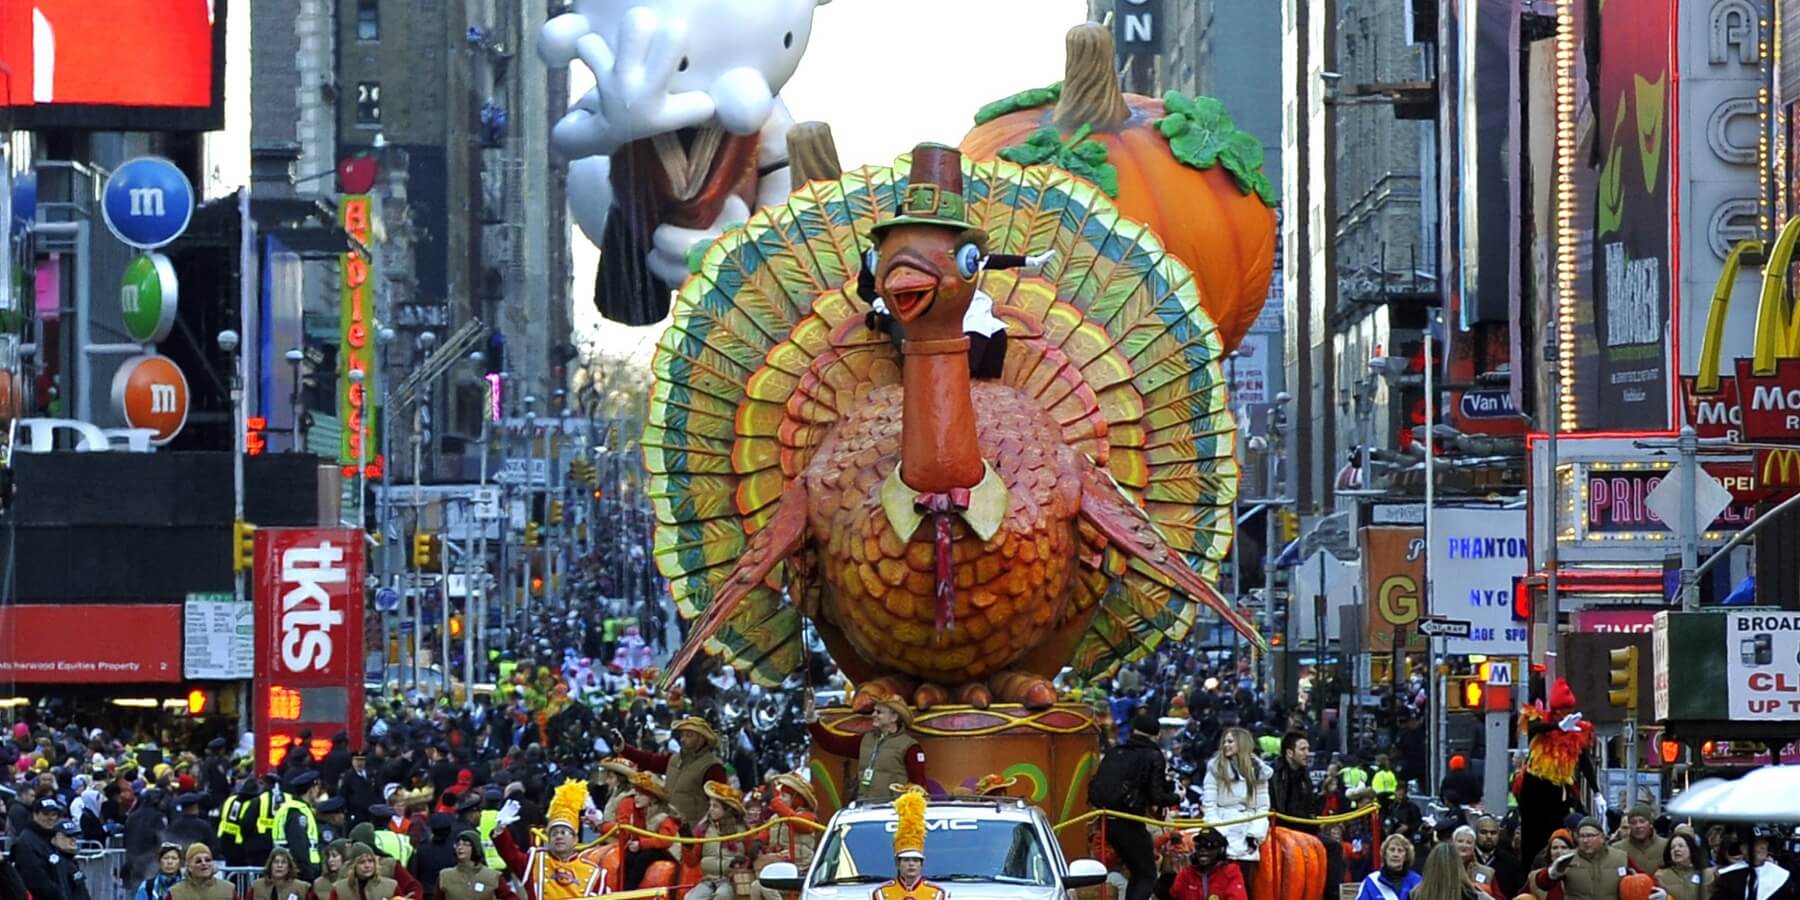 The iconic Turkey float during the 'Macy's Thanksgiving Day Parade.'